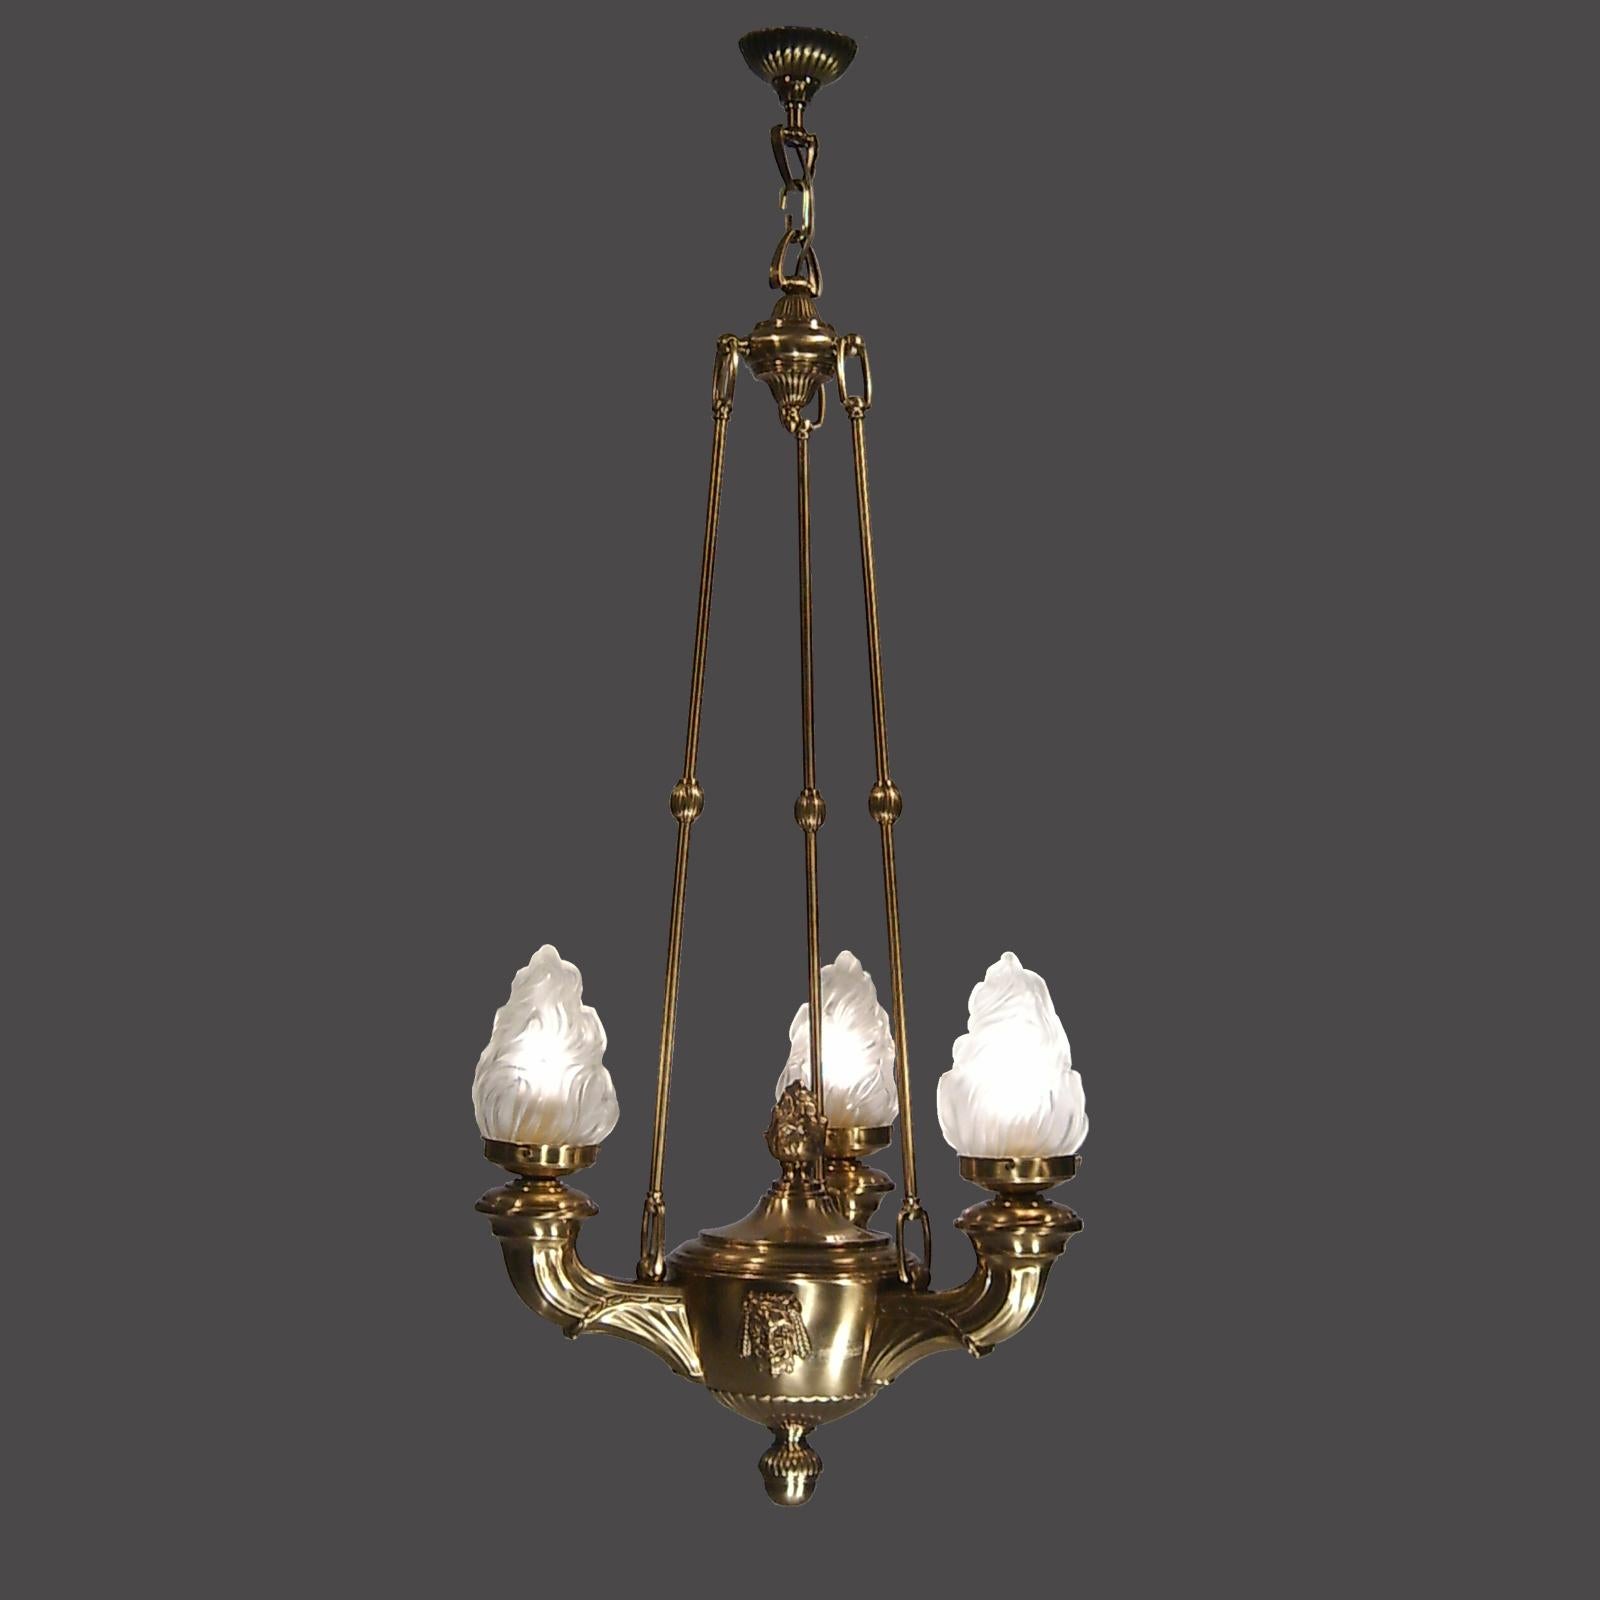 Brass chandelier with glass-shades.

Measures: Technical data
Height 100 cm (39.37 inch)
Ø 45 cm (17.72 inch)
Power: 3-6W-LED 

All components according to the UL regulations.